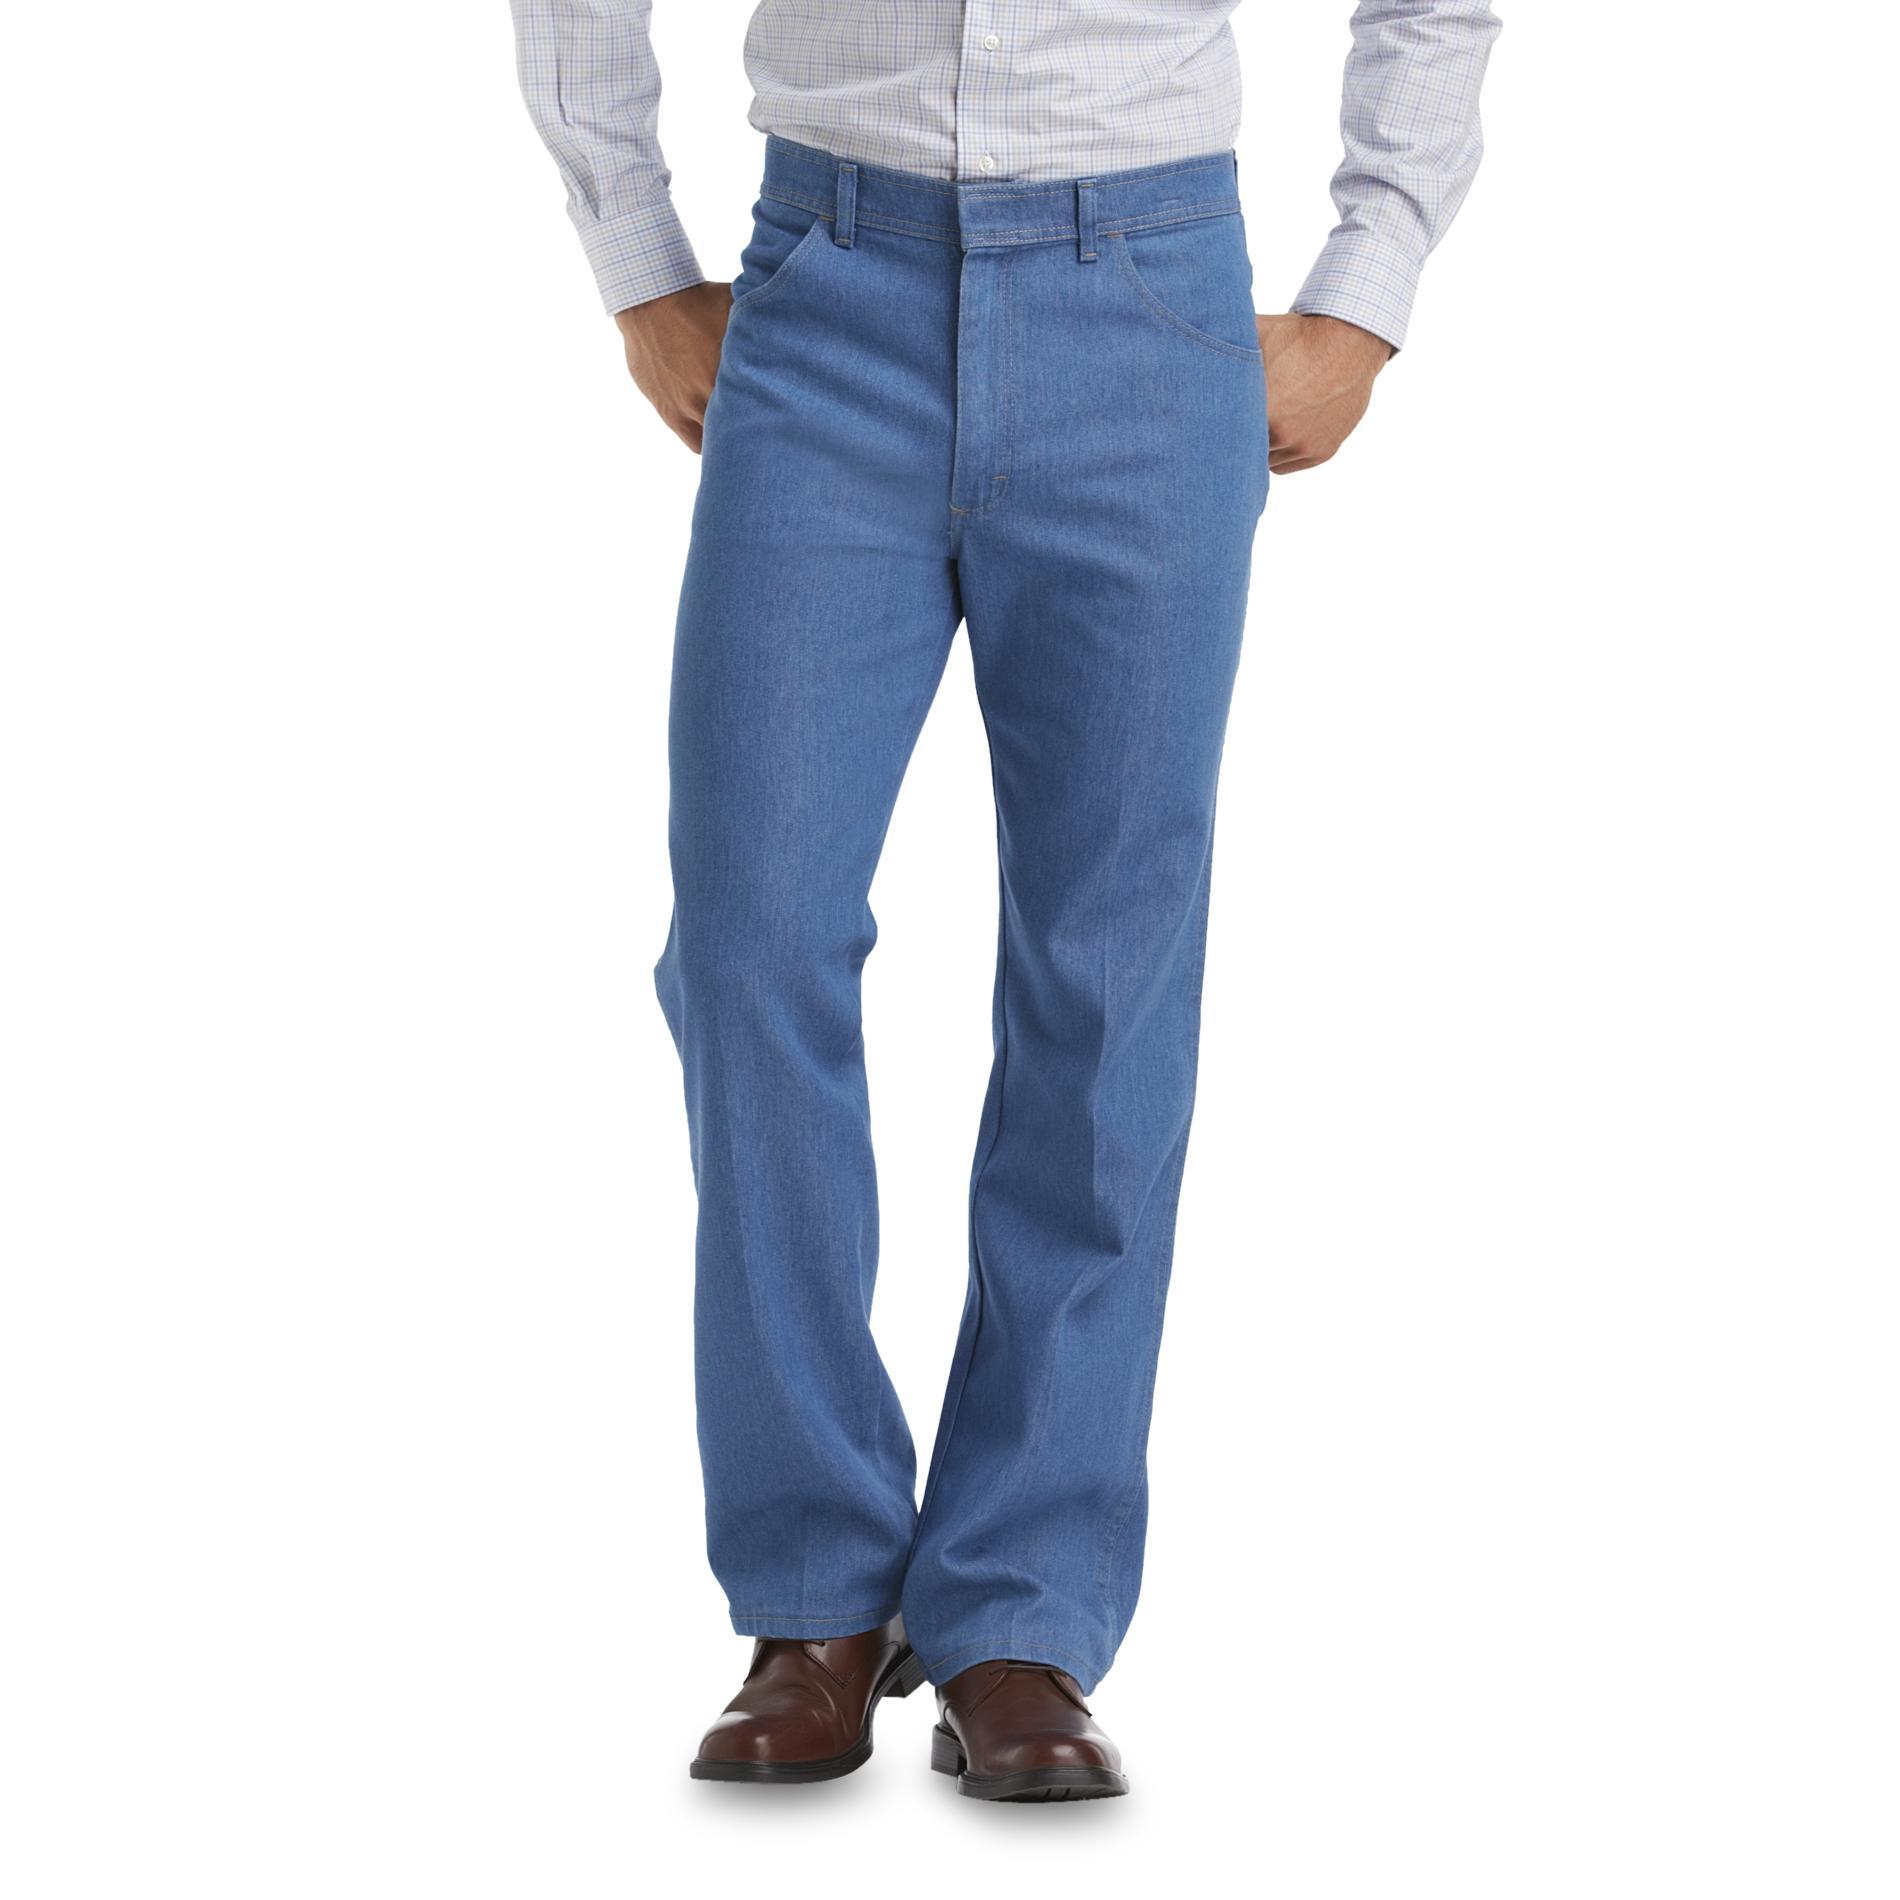 Basic Editions Men's Big & Tall Comfort Action Jeans | Shop Your Way